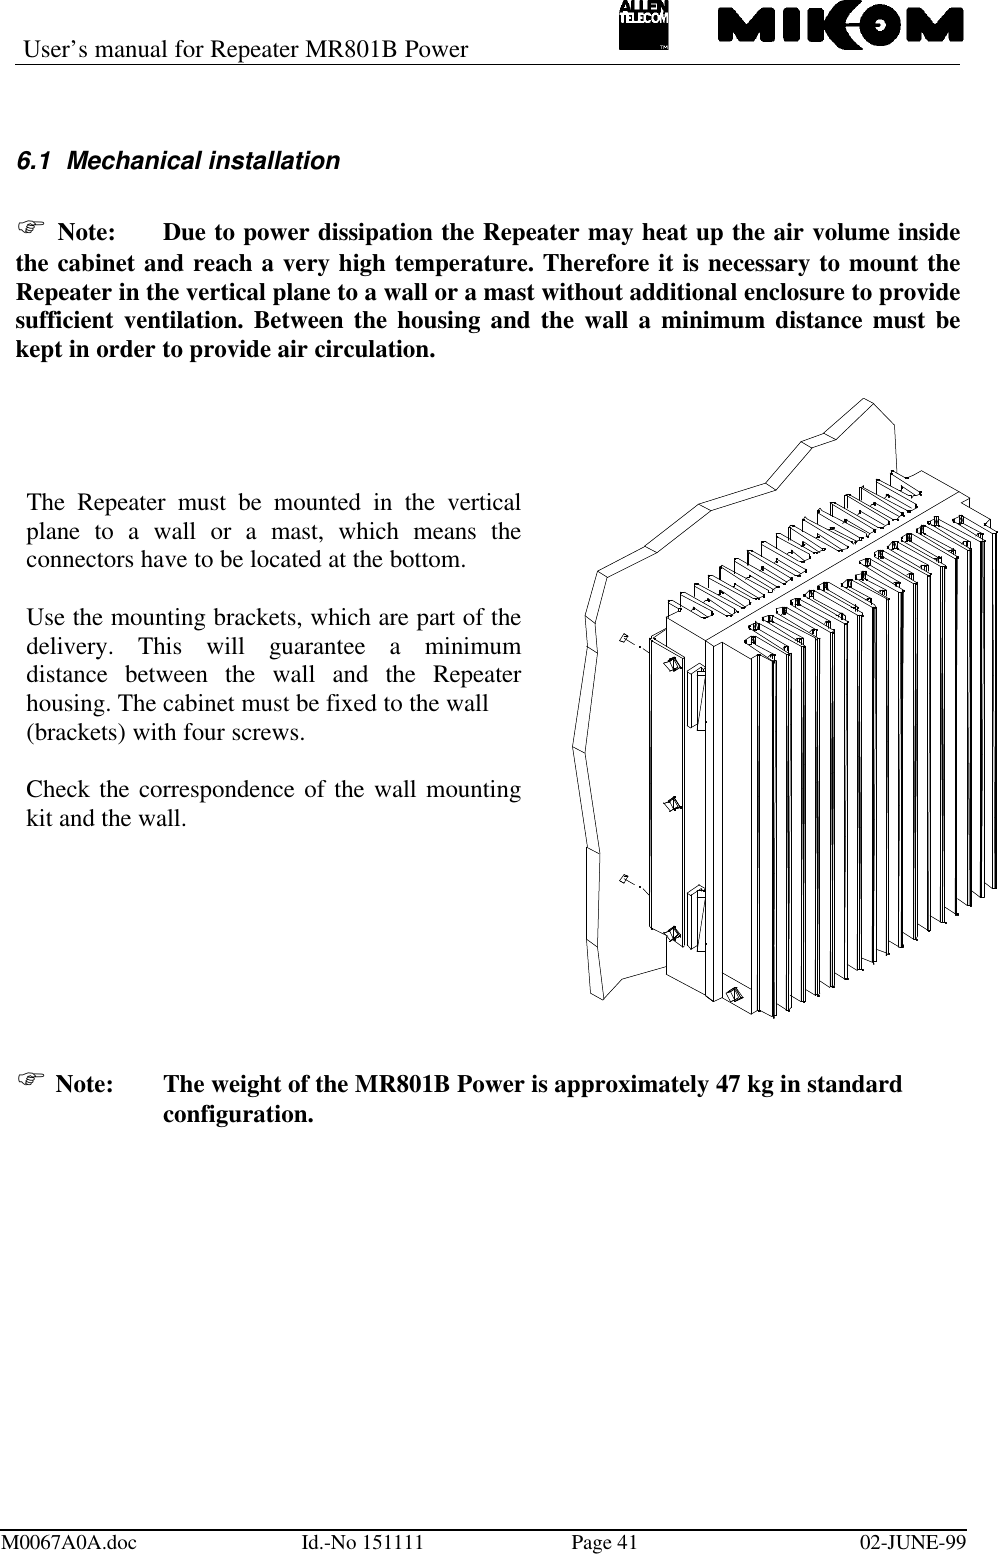 User’s manual for Repeater MR801B PowerM0067A0A.doc Id.-No 151111 Page 41 02-JUNE-996.1 Mechanical installationF Note: Due to power dissipation the Repeater may heat up the air volume insidethe cabinet and reach a very high temperature. Therefore it is necessary to mount theRepeater in the vertical plane to a wall or a mast without additional enclosure to providesufficient ventilation. Between the housing and the wall a minimum distance must bekept in order to provide air circulation.F Note: The weight of the MR801B Power is approximately 47 kg in standardconfiguration.The Repeater must be mounted in the verticalplane to a wall or a mast, which means theconnectors have to be located at the bottom.Use the mounting brackets, which are part of thedelivery. This will guarantee a minimumdistance between the wall and the Repeaterhousing. The cabinet must be fixed to the wall(brackets) with four screws.Check the correspondence of the wall mountingkit and the wall.